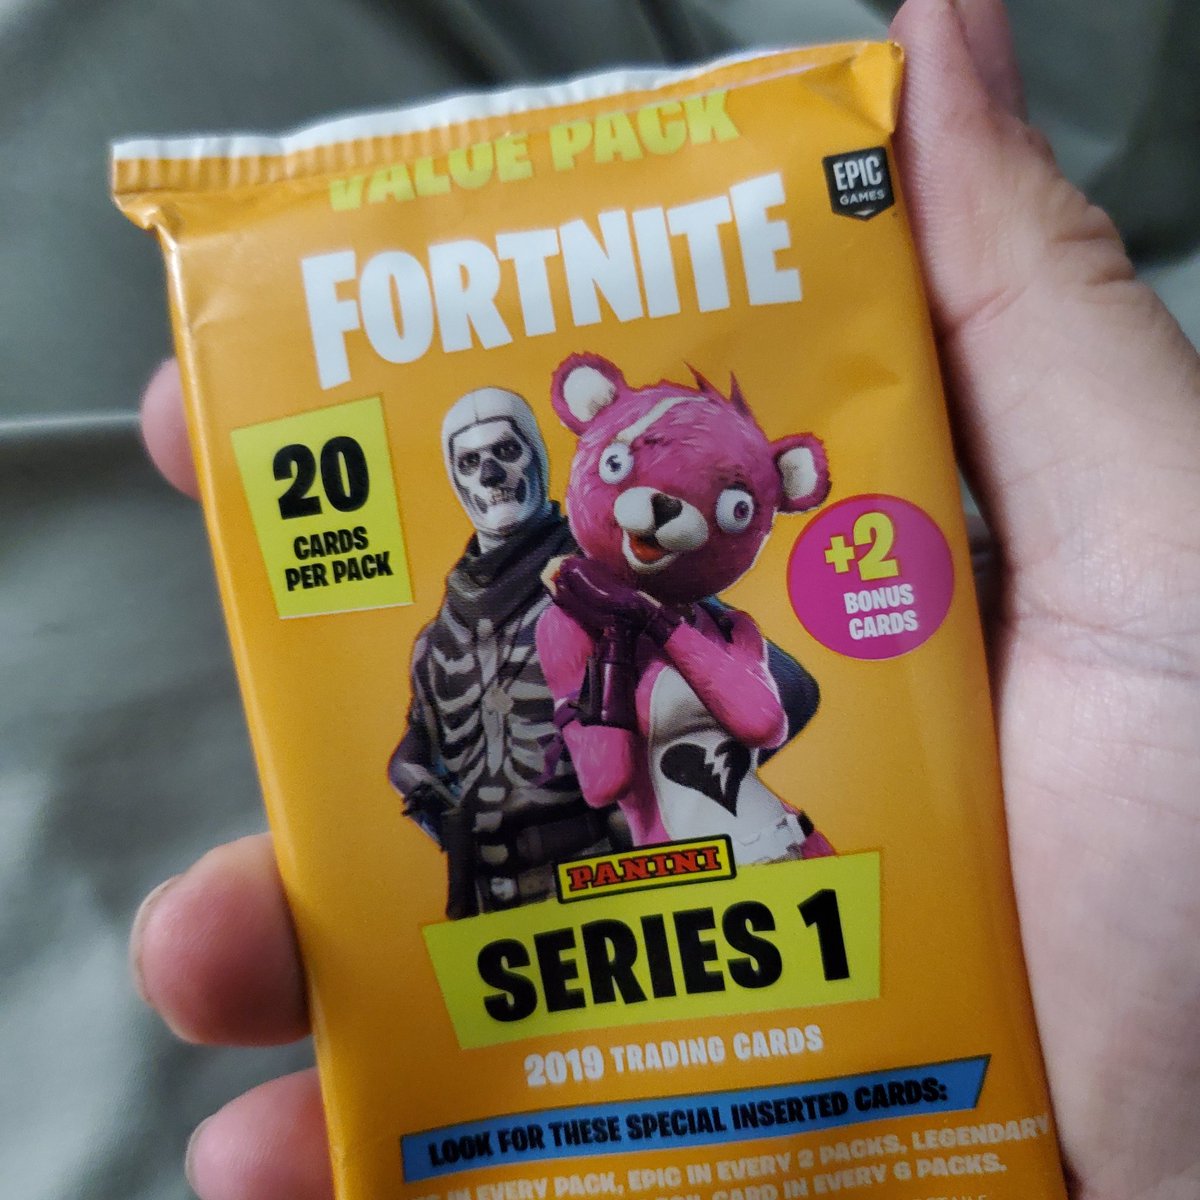 19 Panini Fortnite Series 1 Trading Cards Complete Your Set Skins List U Pick Other Sports Trading Cards Sports Mem Cards Fan Shop Sports Trading Cards